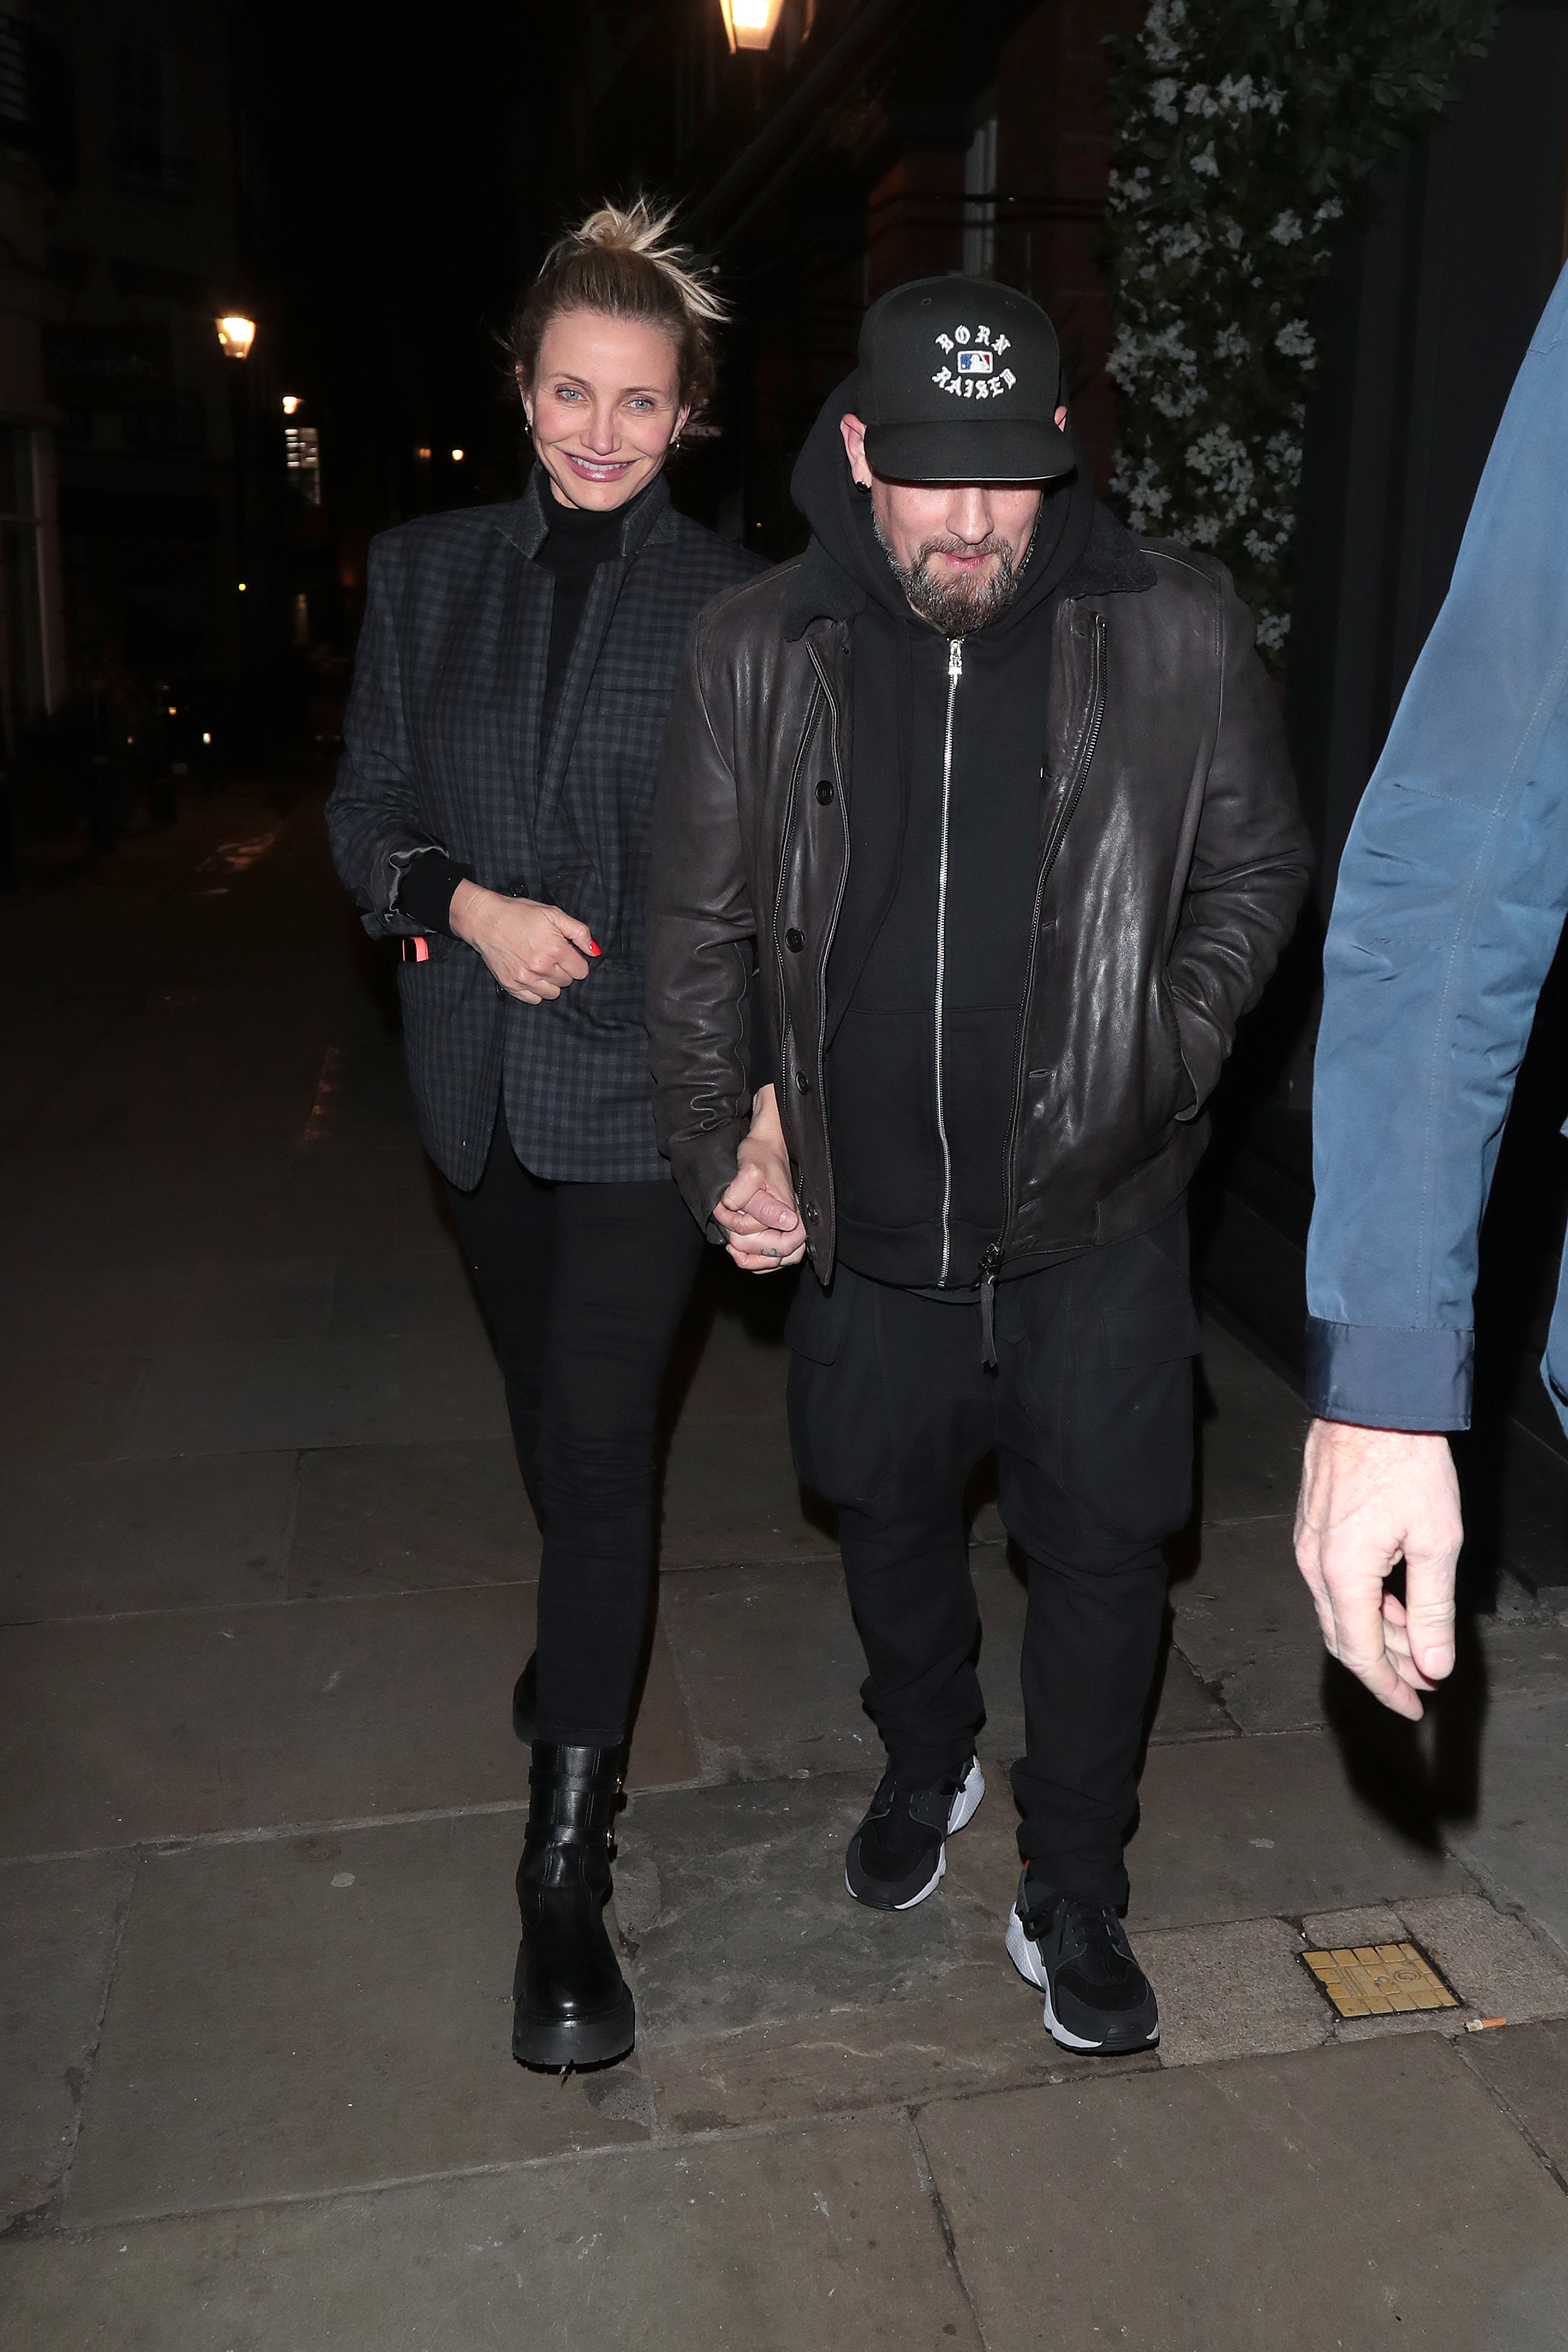 Cameron Diaz and Benji Madden on December 3, 2022, in London, England. | Source: Getty Images